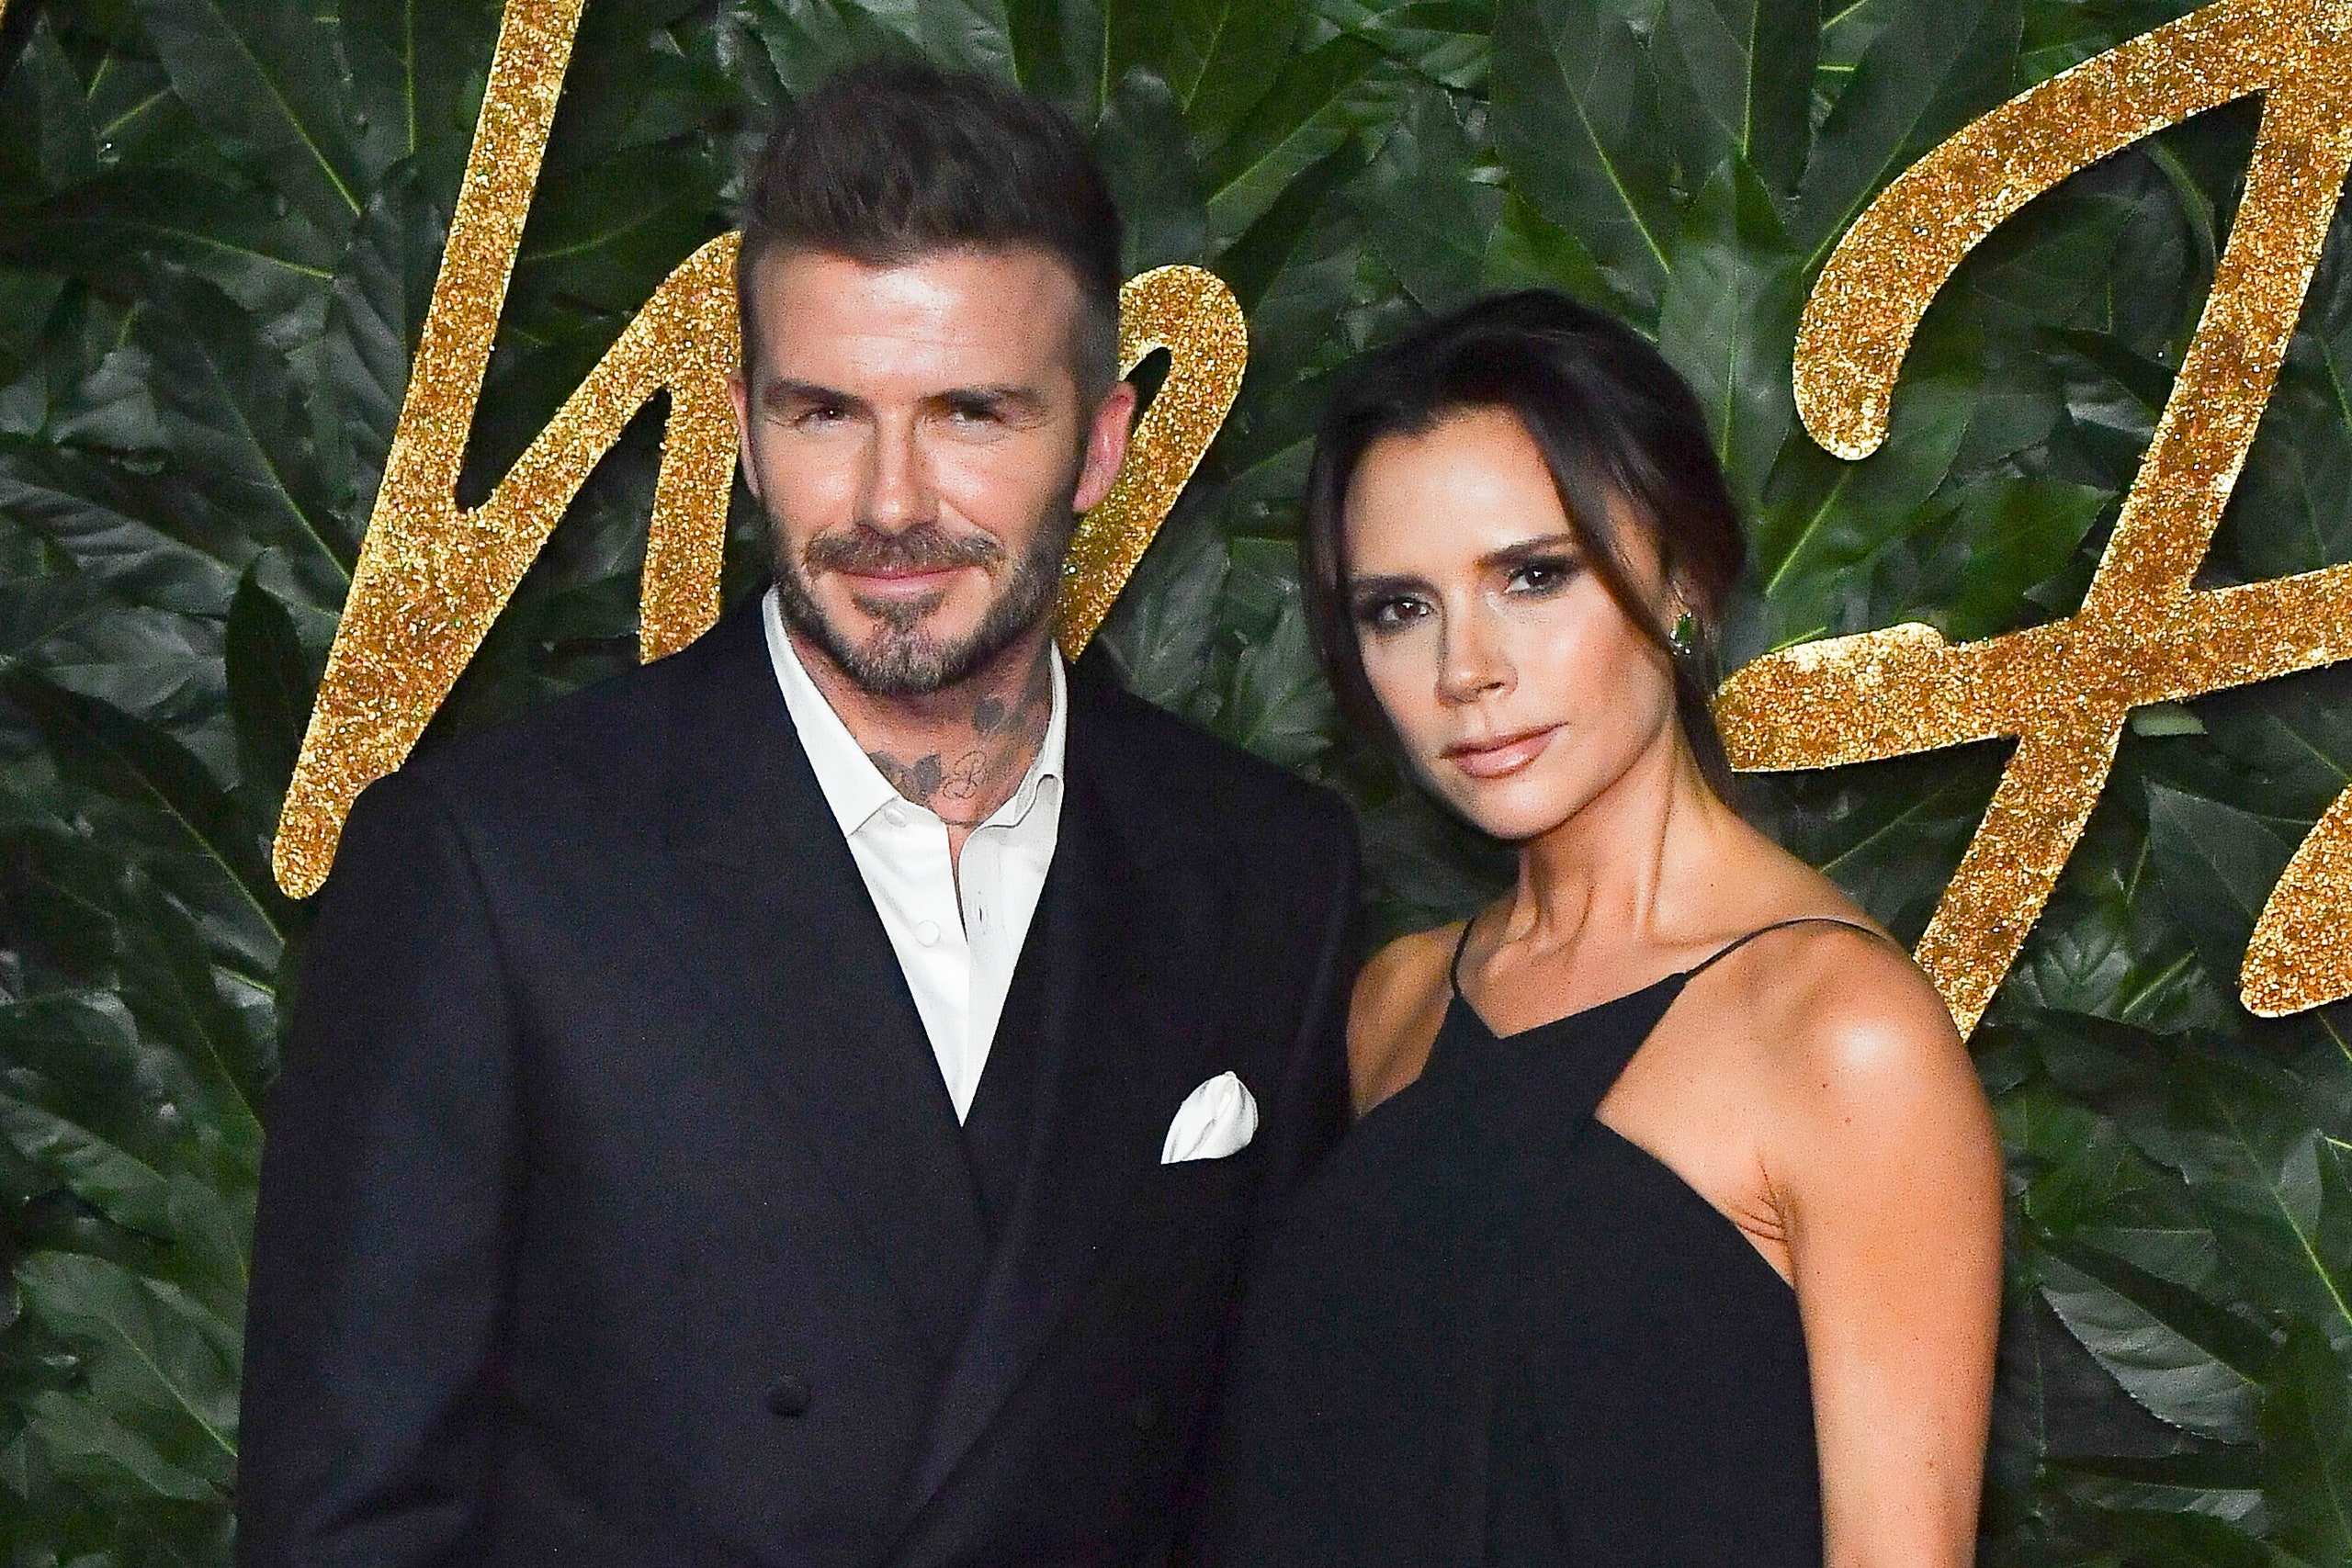 David Beckham and Victoria Beckham on Edge After Cheating Allegations!